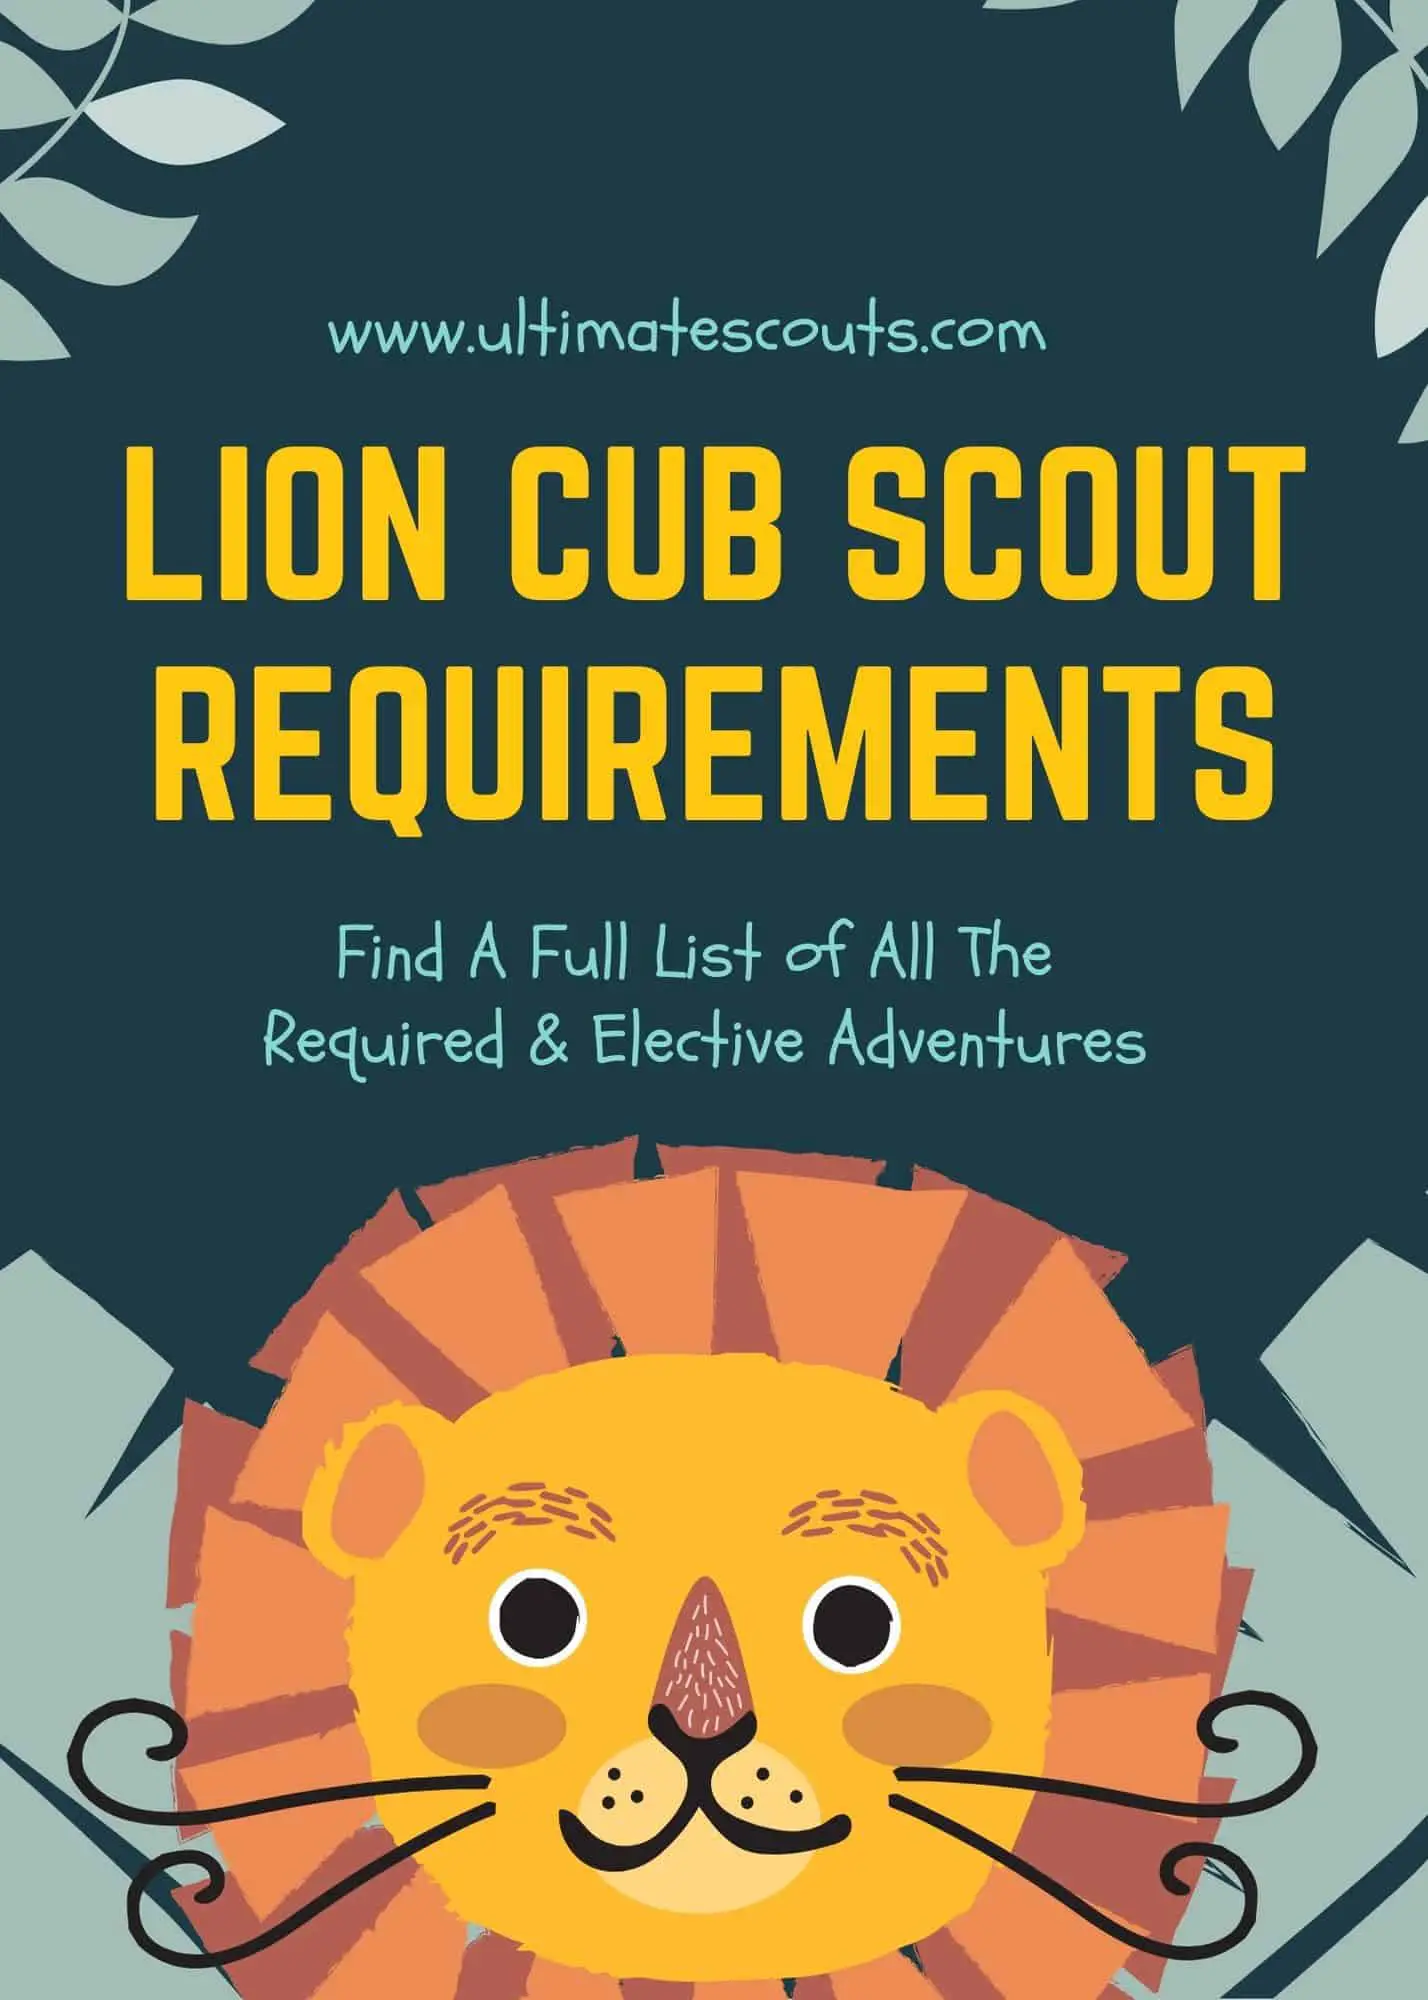 What Are The Cub Scouts Lion Requirements?